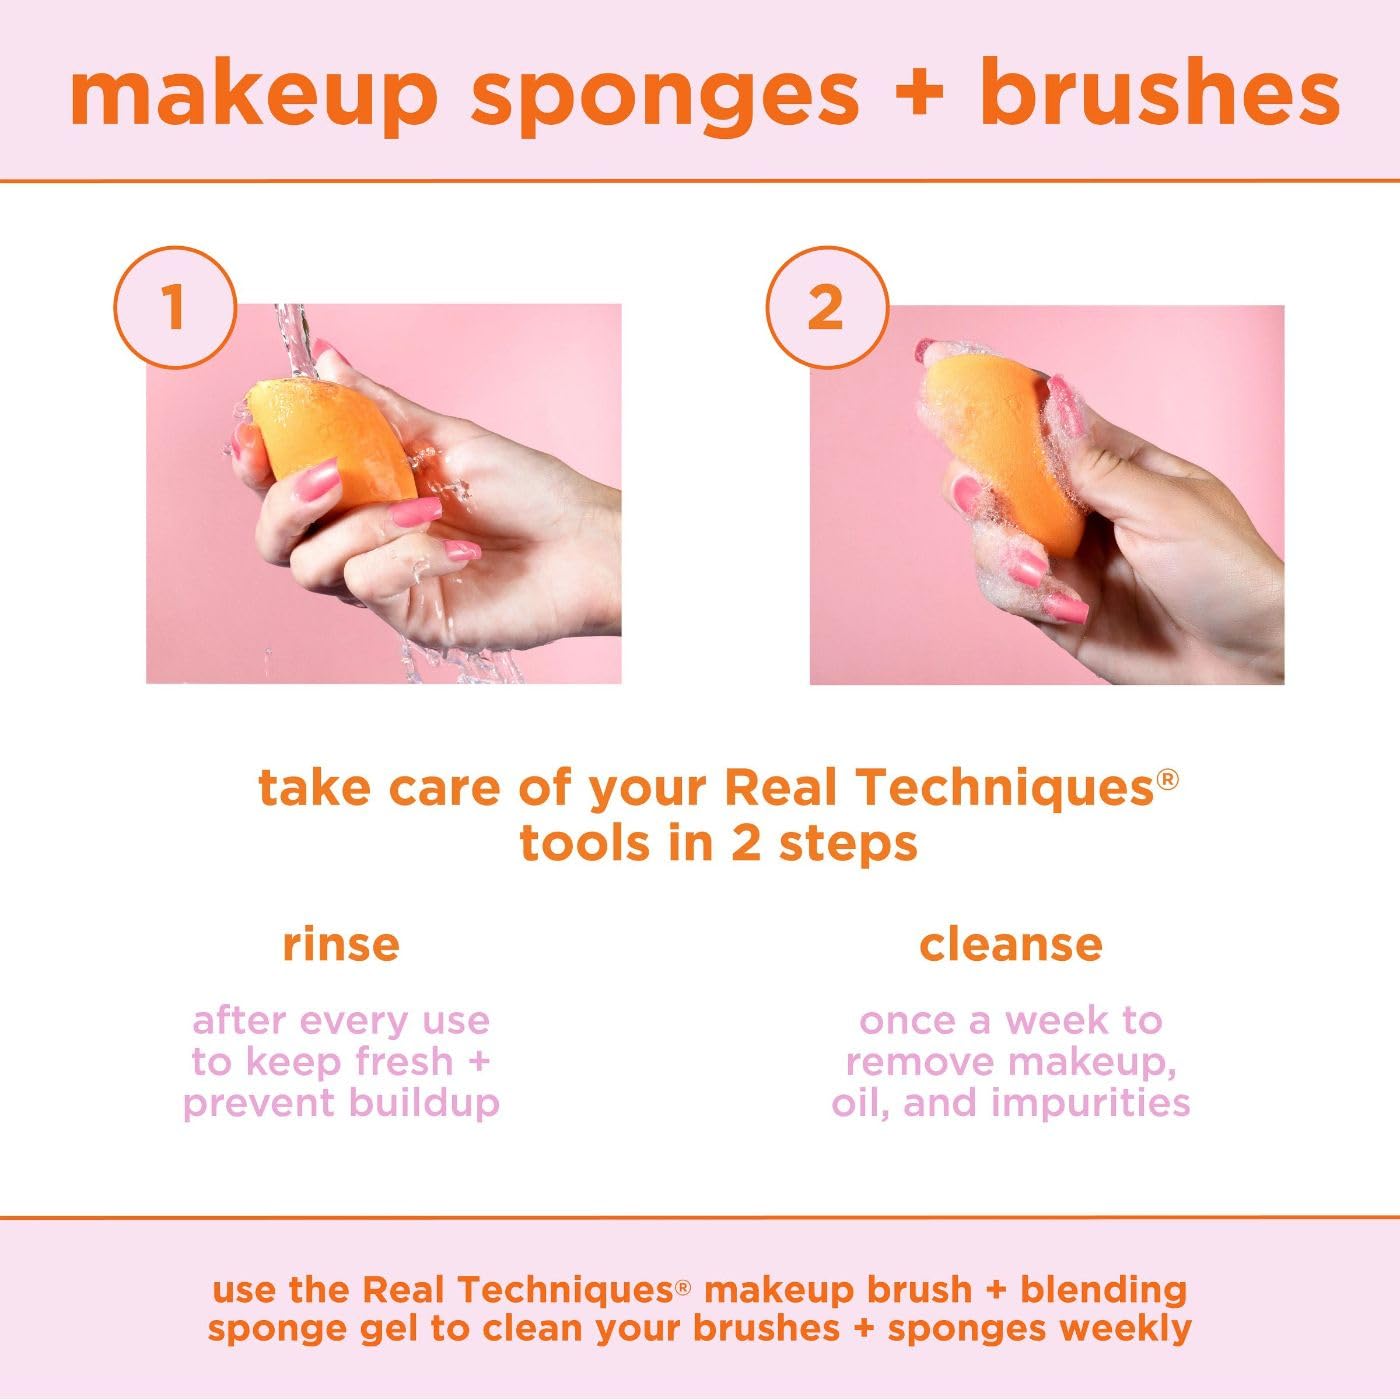 Real Techniques Assorted Makeup Blending Sponges, Miracle Complexion, Miracle Powder, & Miracle Airblend Sponges, For Blending & Baking, Use With Foundation & Powder, Dewy or Matte Finish, 6 Pack